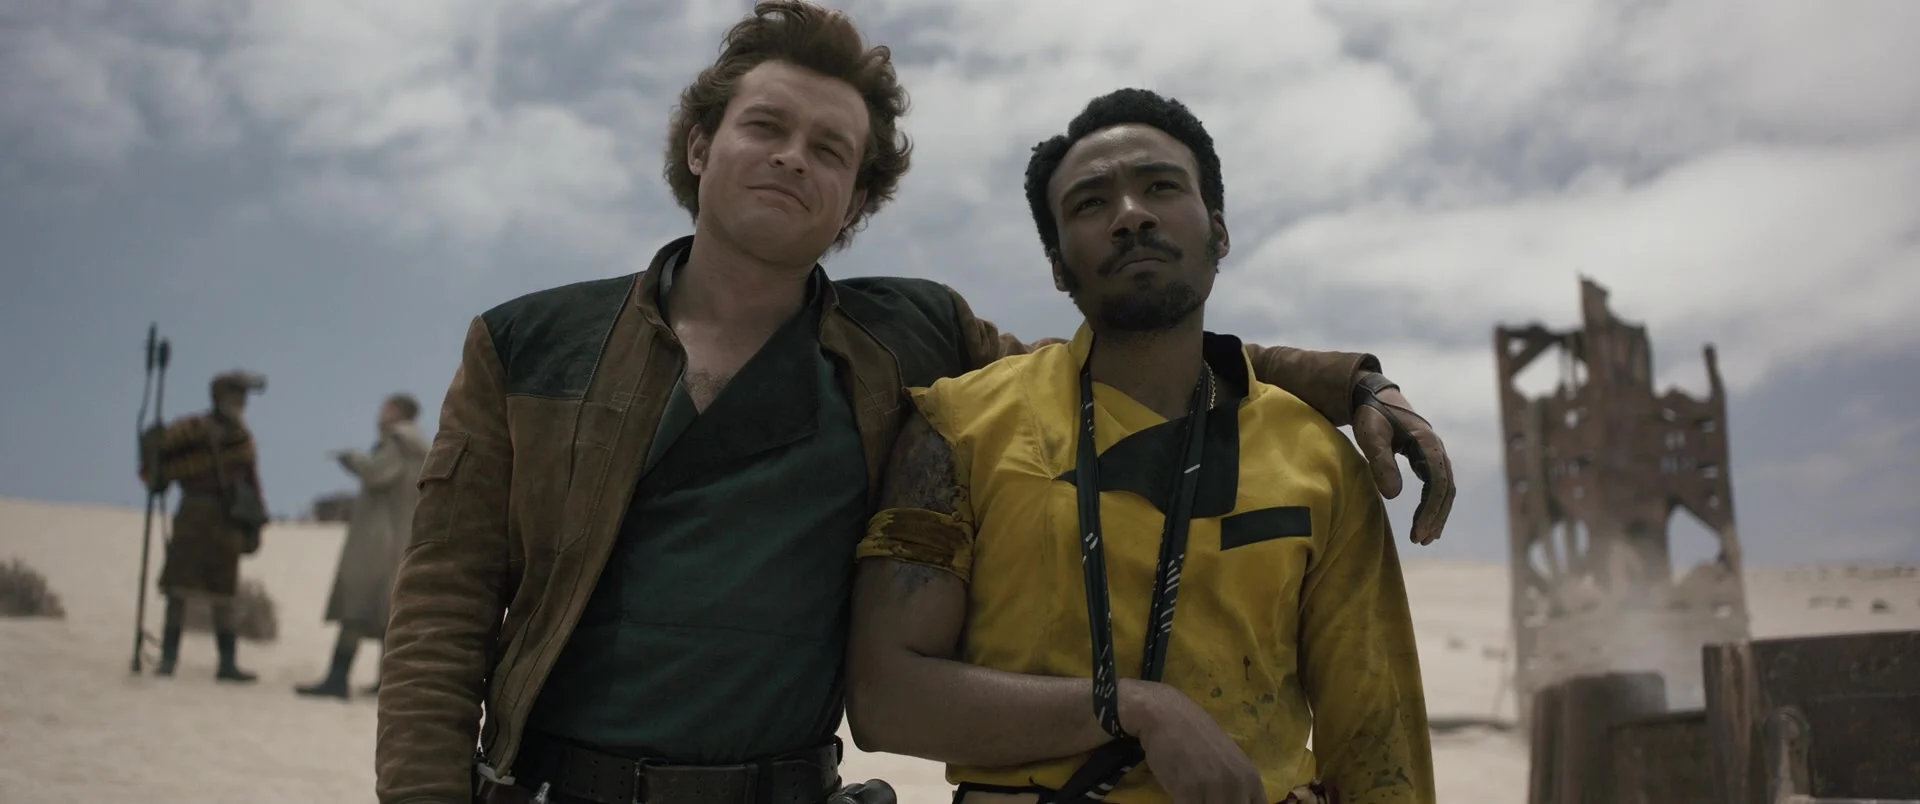 Han Solo (Alden Ehrenreich) takes a breather with Lando Calrissian (Donald Glover) in Solo: A Star Wars Story (2018), Lucasfilm